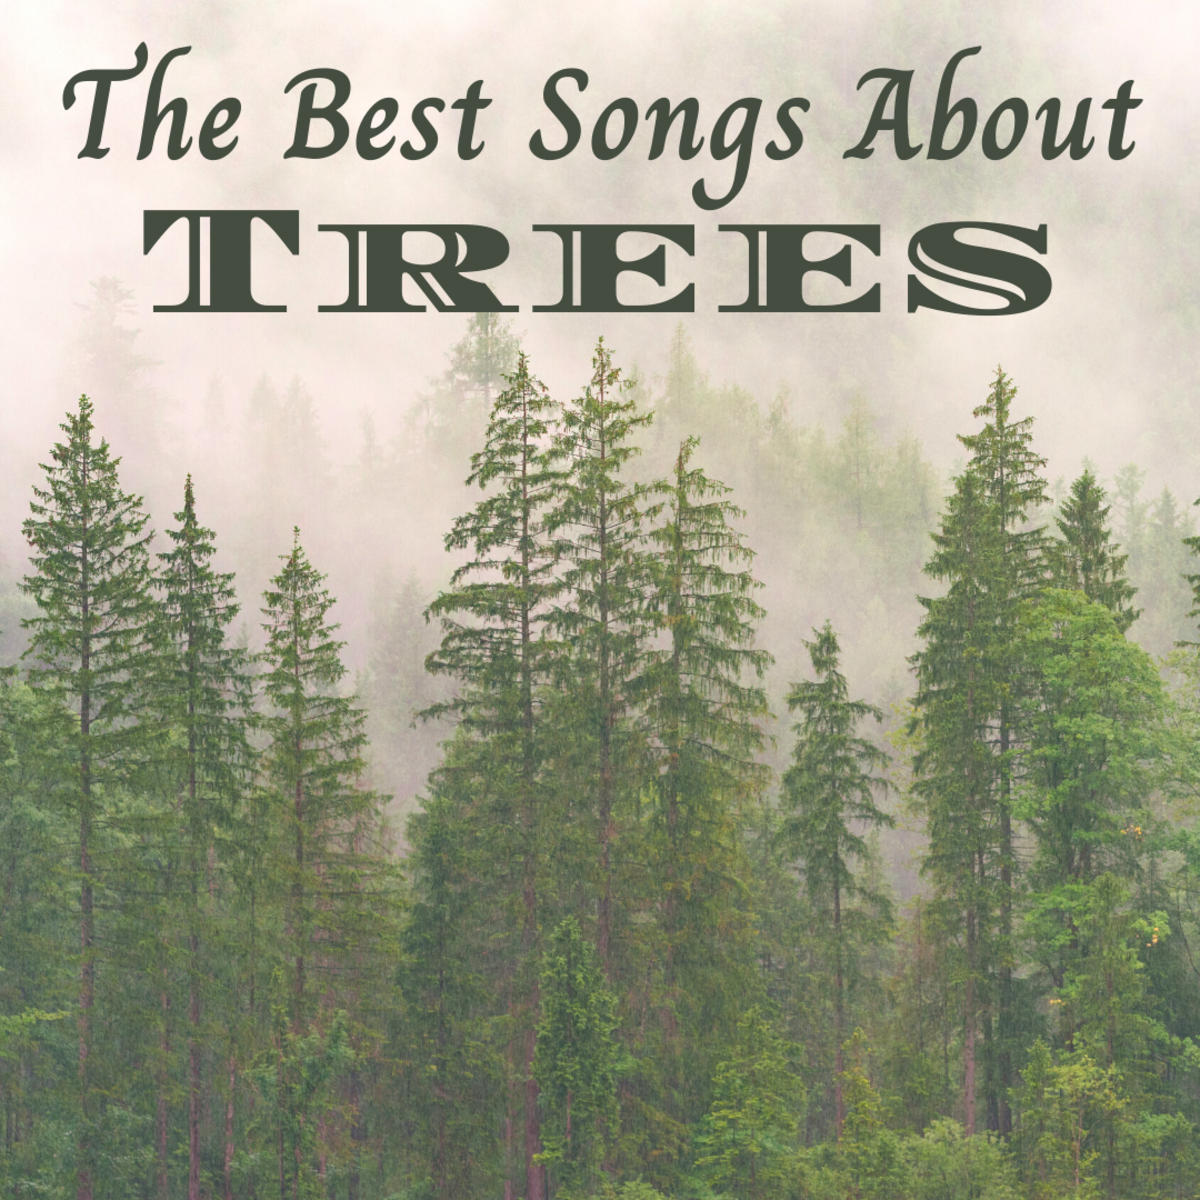 Trees make the world a better place. Here, you'll discover all the best songs about them!